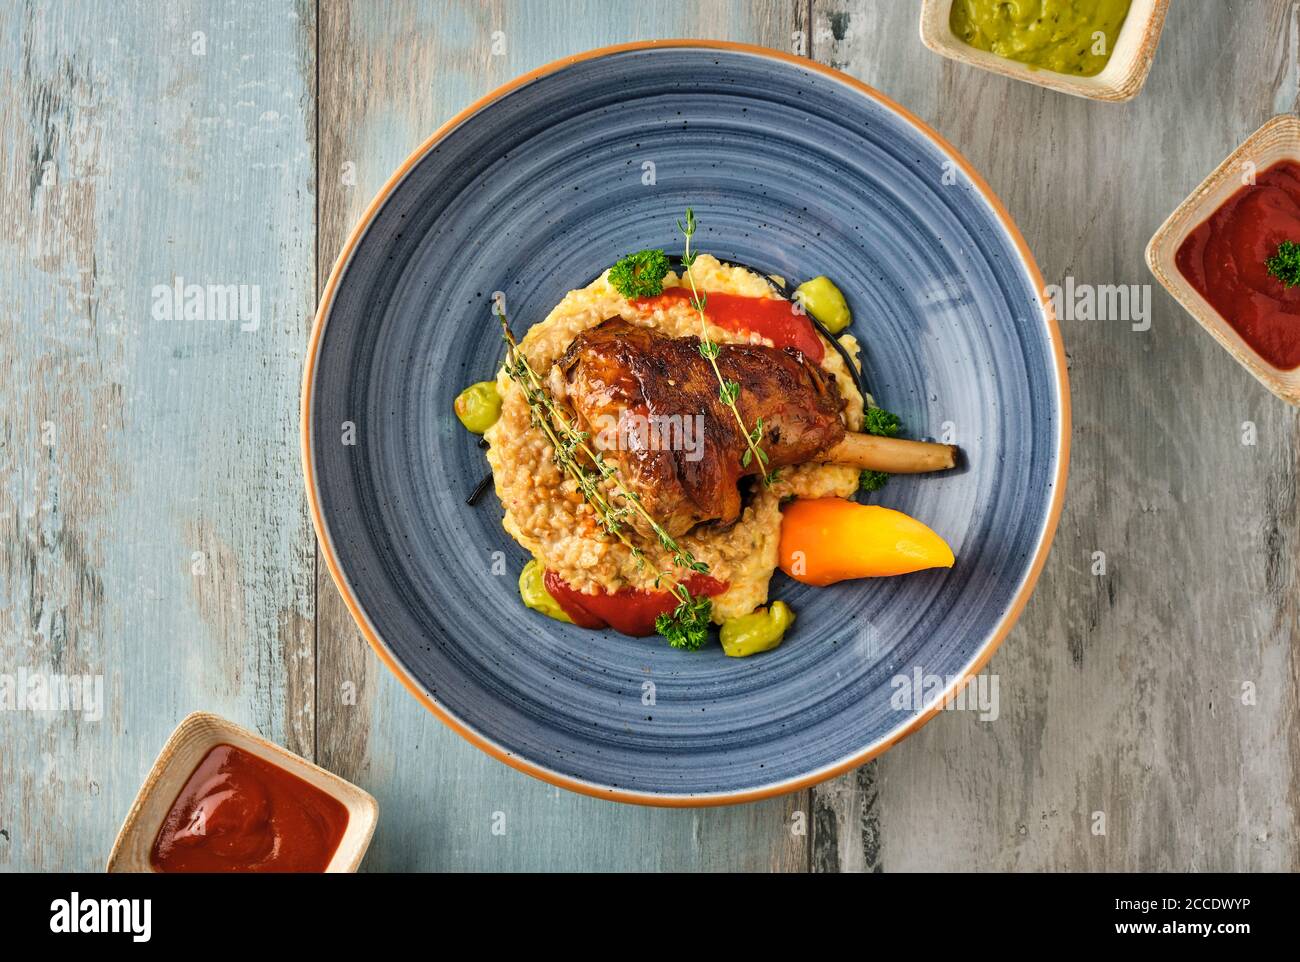 Braised lamb shank on the mashed potato on wooden table Stock Photo